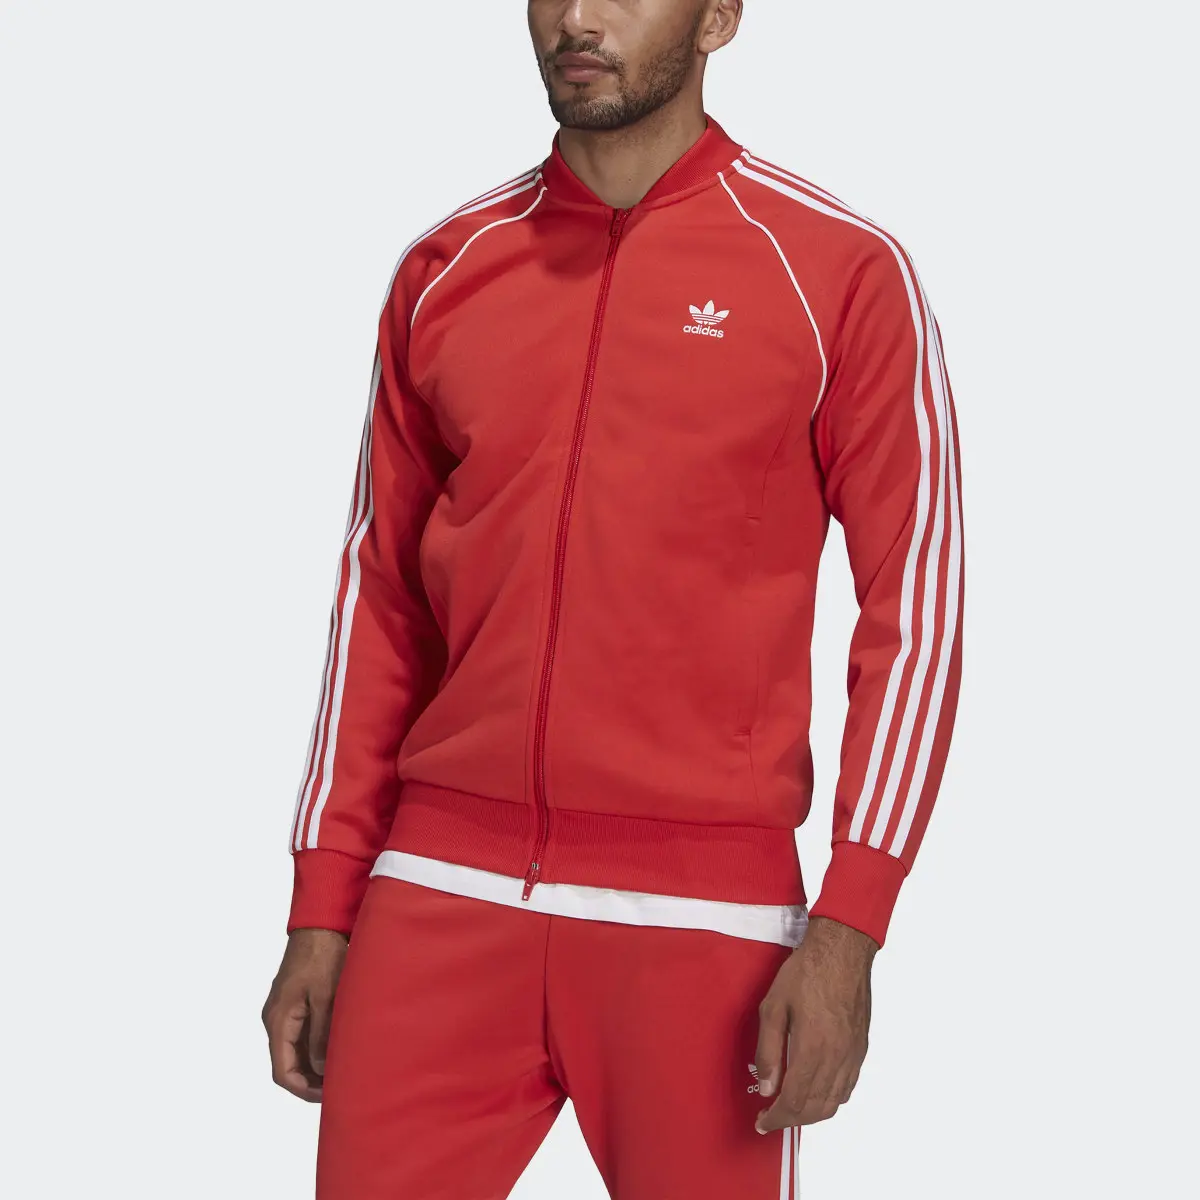 Adidas SST Track Top. 1